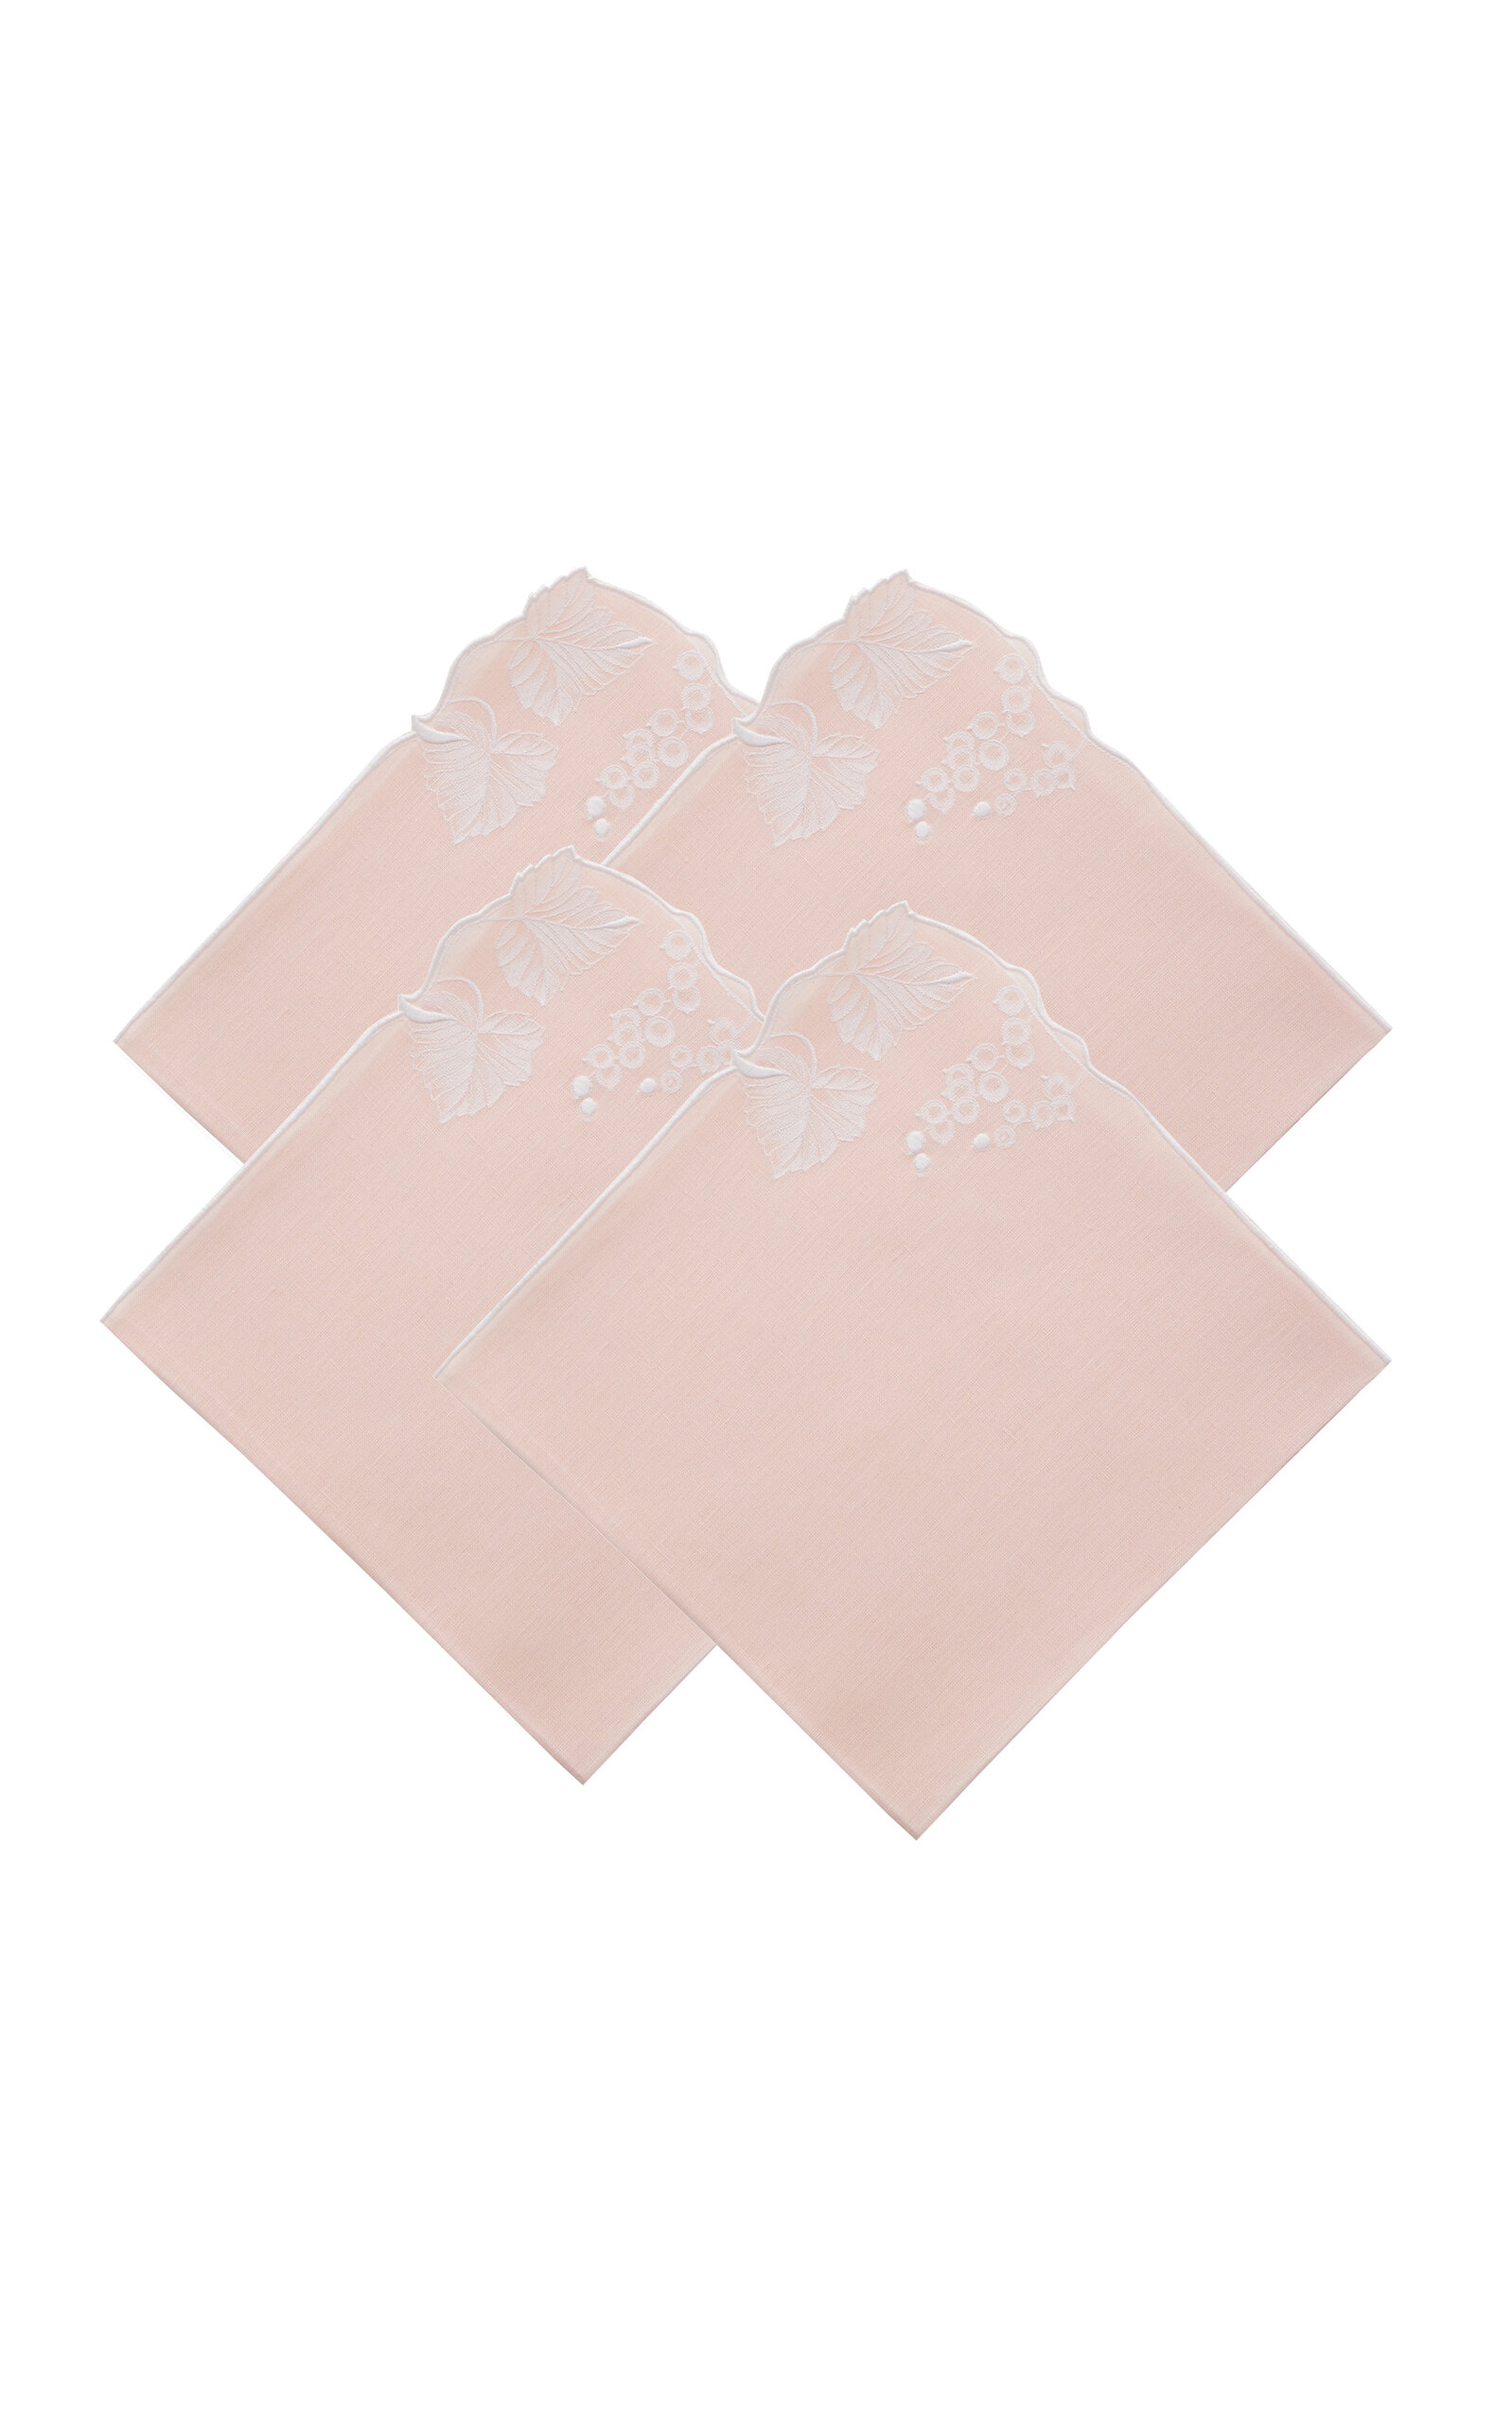 Atelier Houria Tazi Fructus Set-of-four Embroidered Linen Napkins In Pink